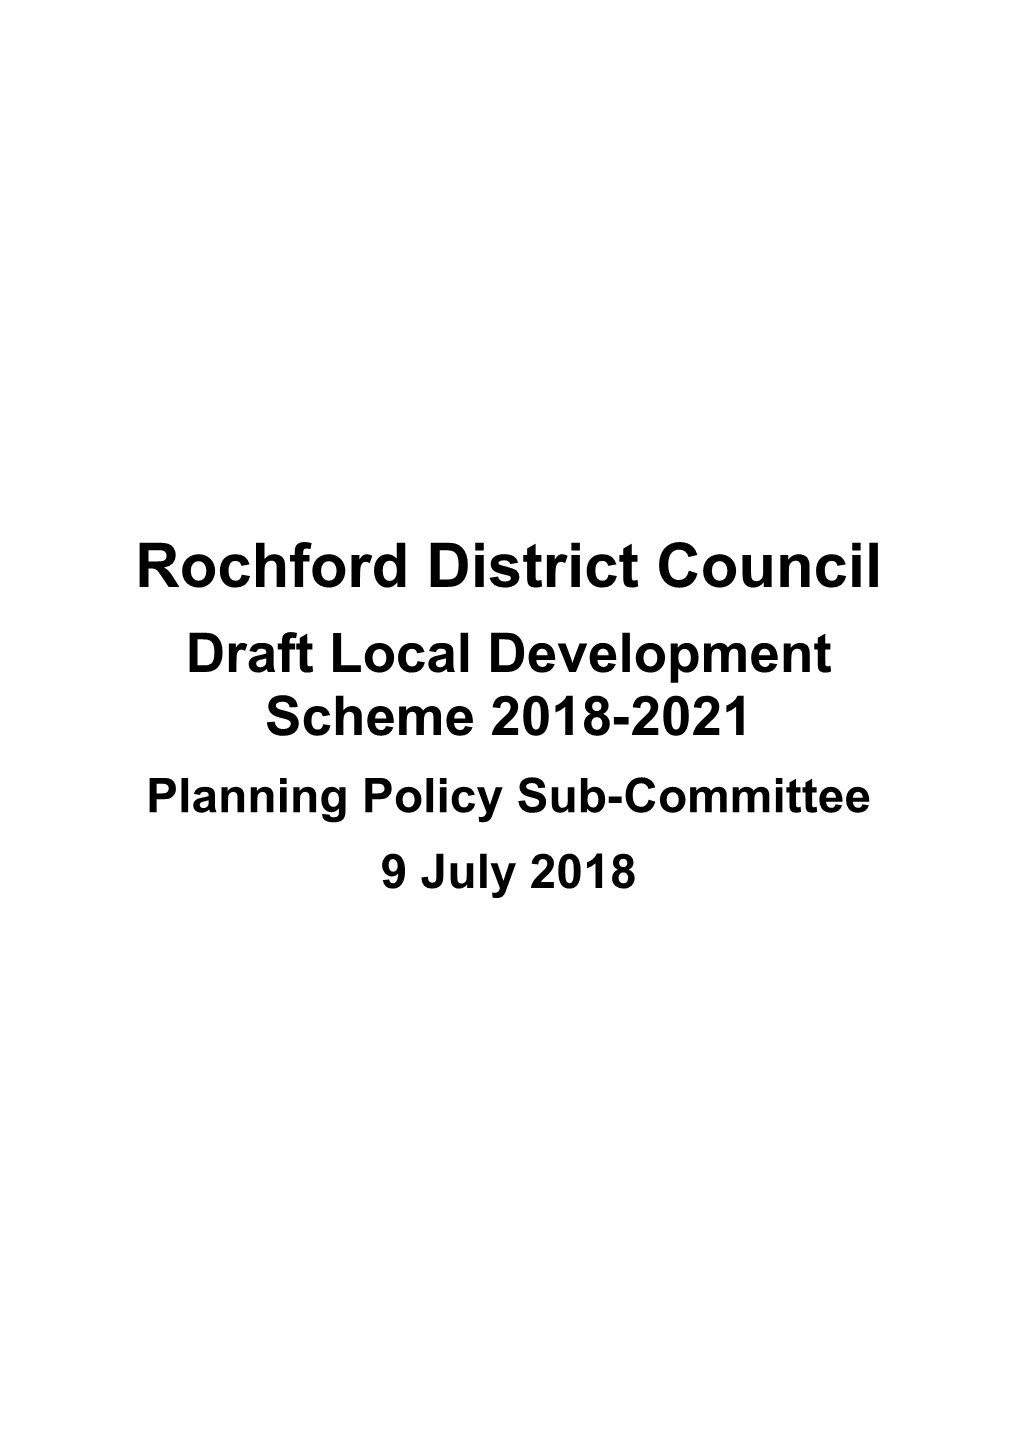 Rochford District Council Draft Local Development Scheme 2018-2021 Planning Policy Sub-Committee 9 July 2018